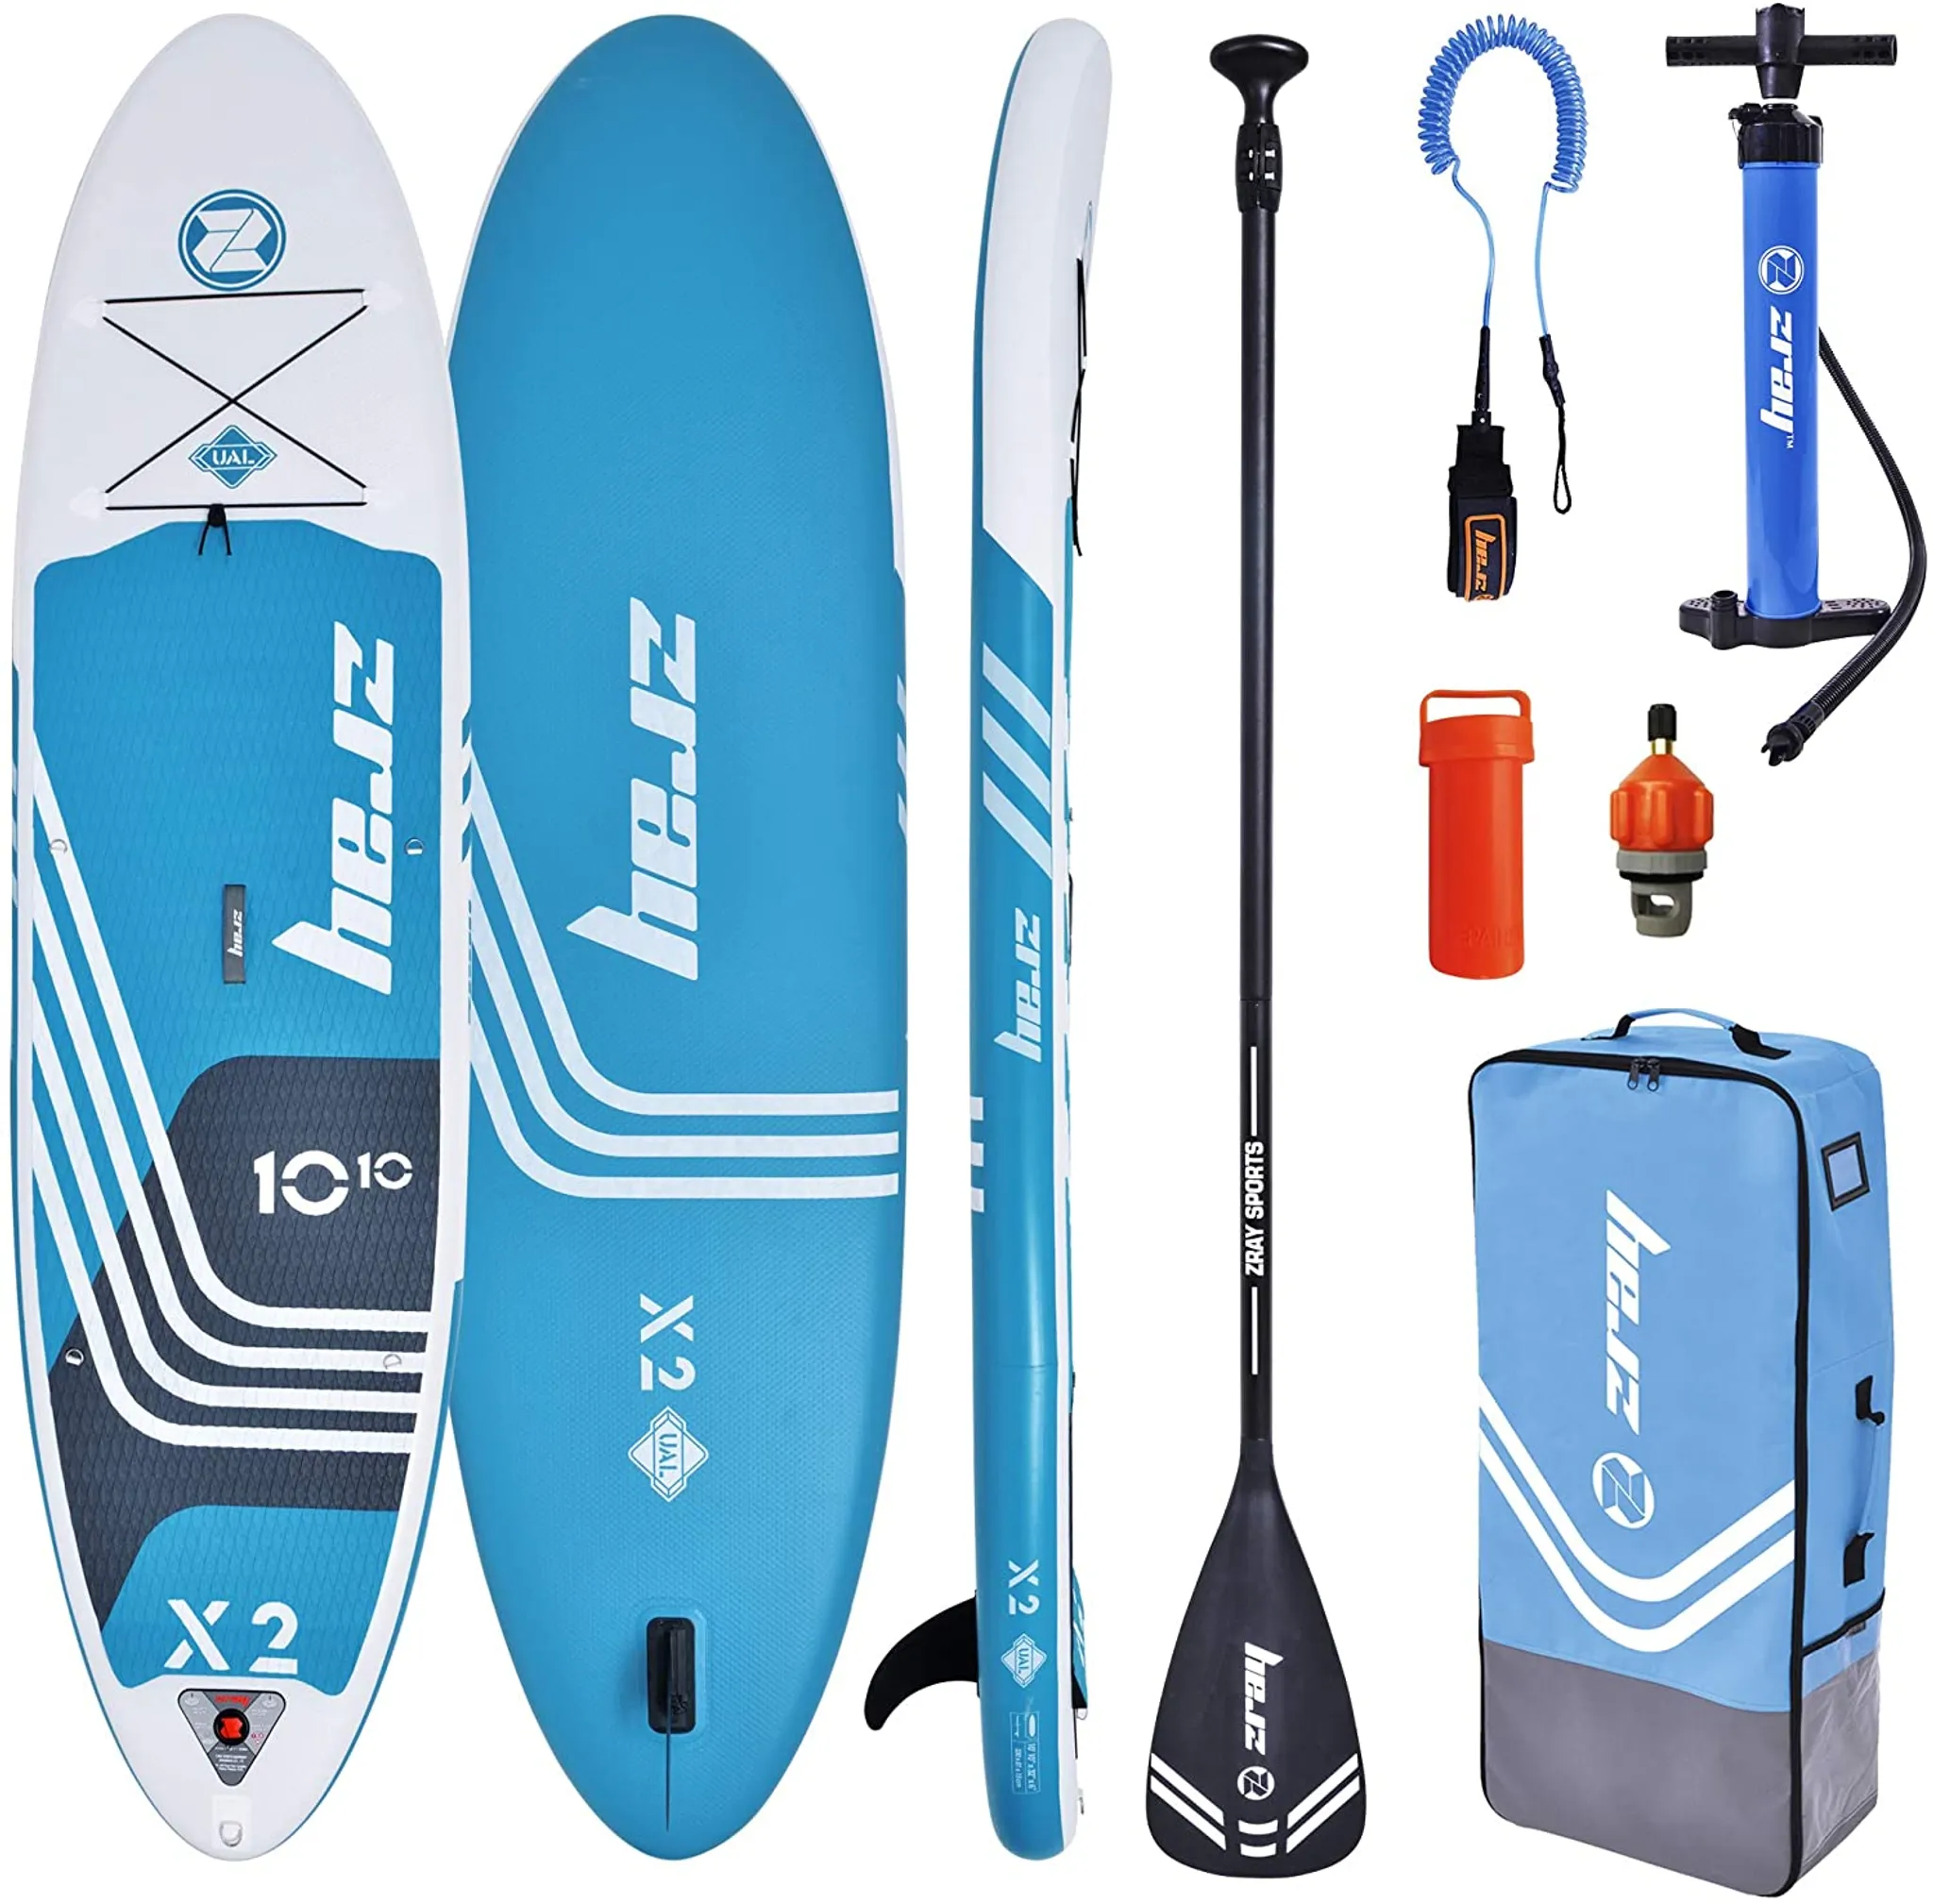 Zray X2 10.10 SUP Board Paddle Up Stand